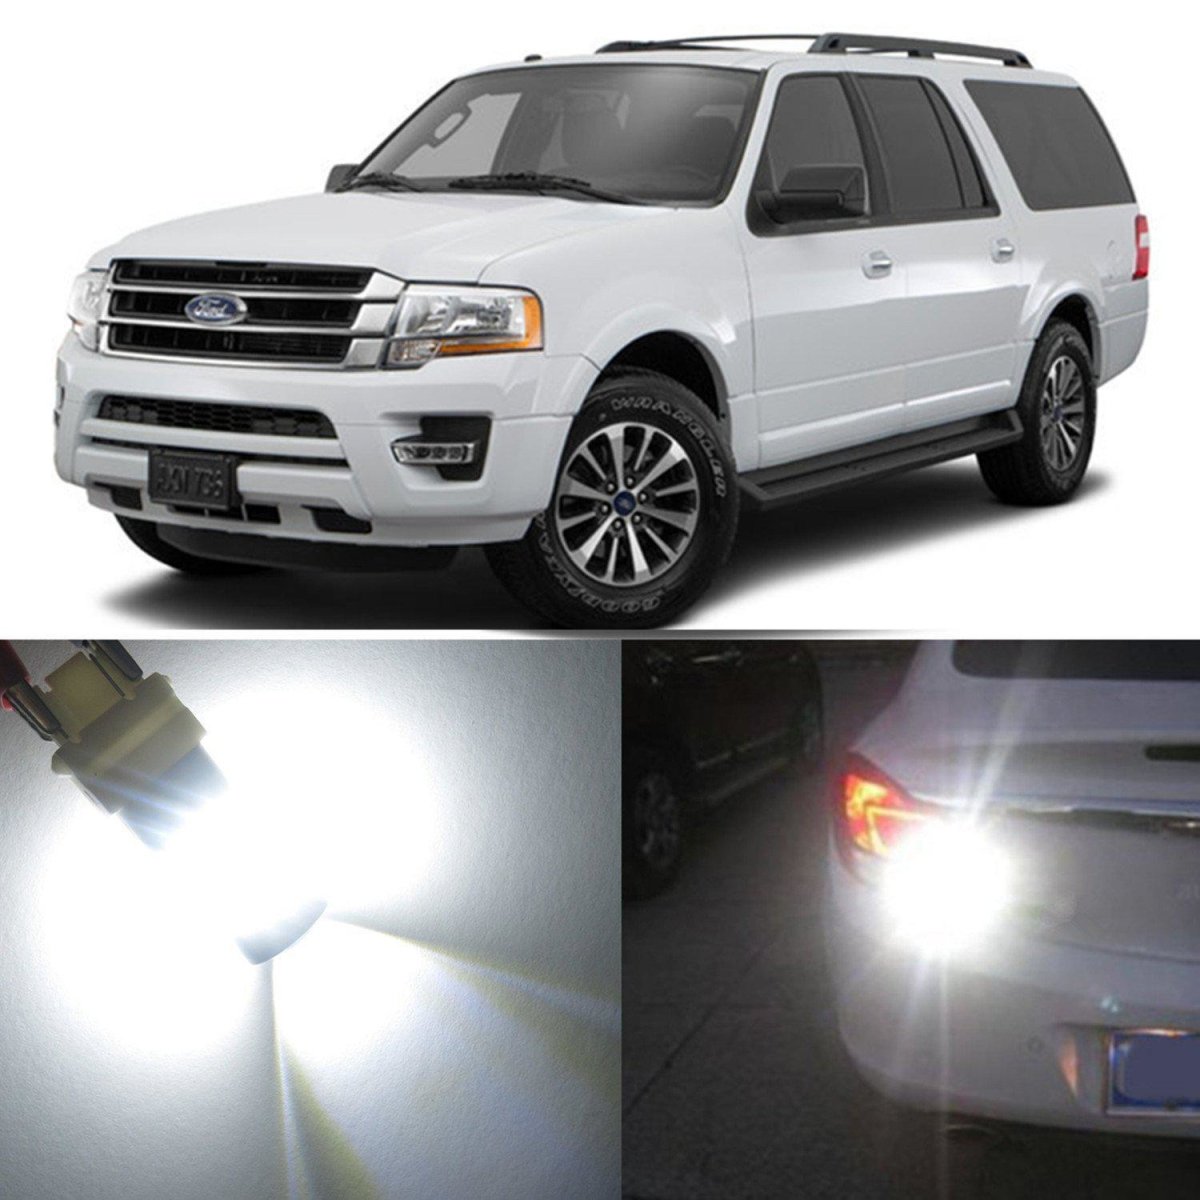 1997-2006/2018-2021 Ford Expedition Reverse Lights Bulbs LED Backup Upgrade -Alla Lighting